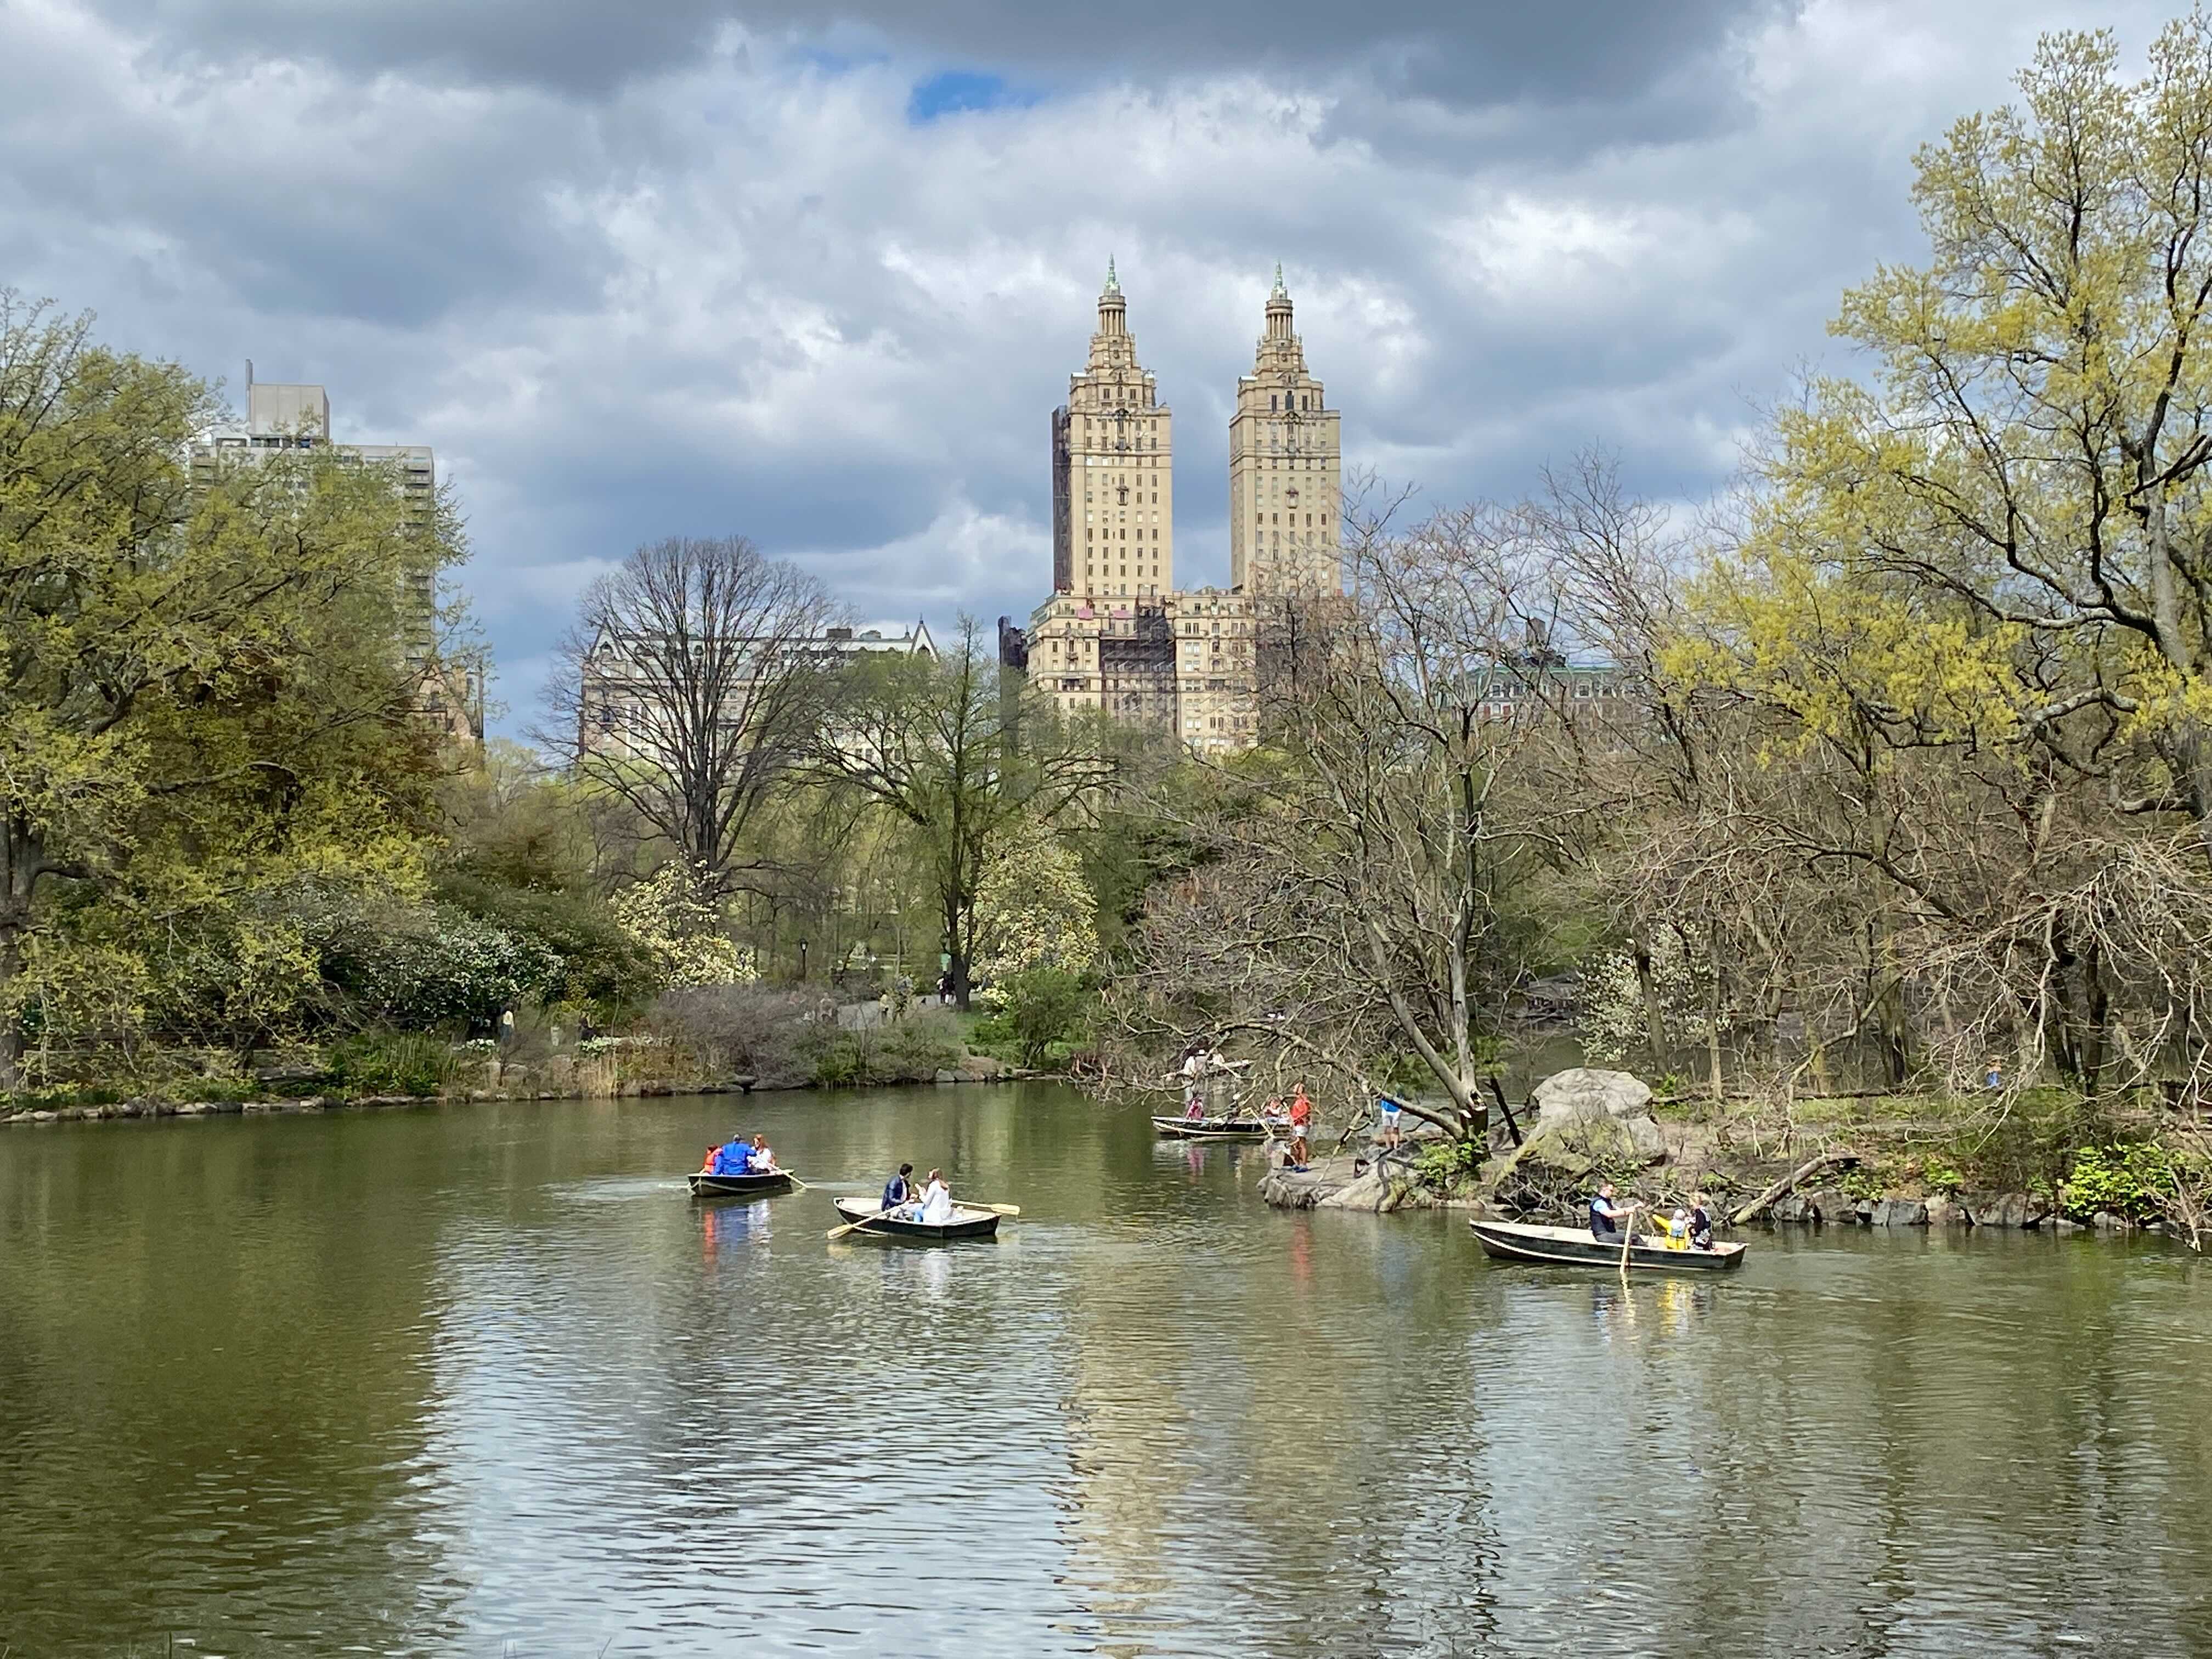 People rowboat in a pond in Central Park